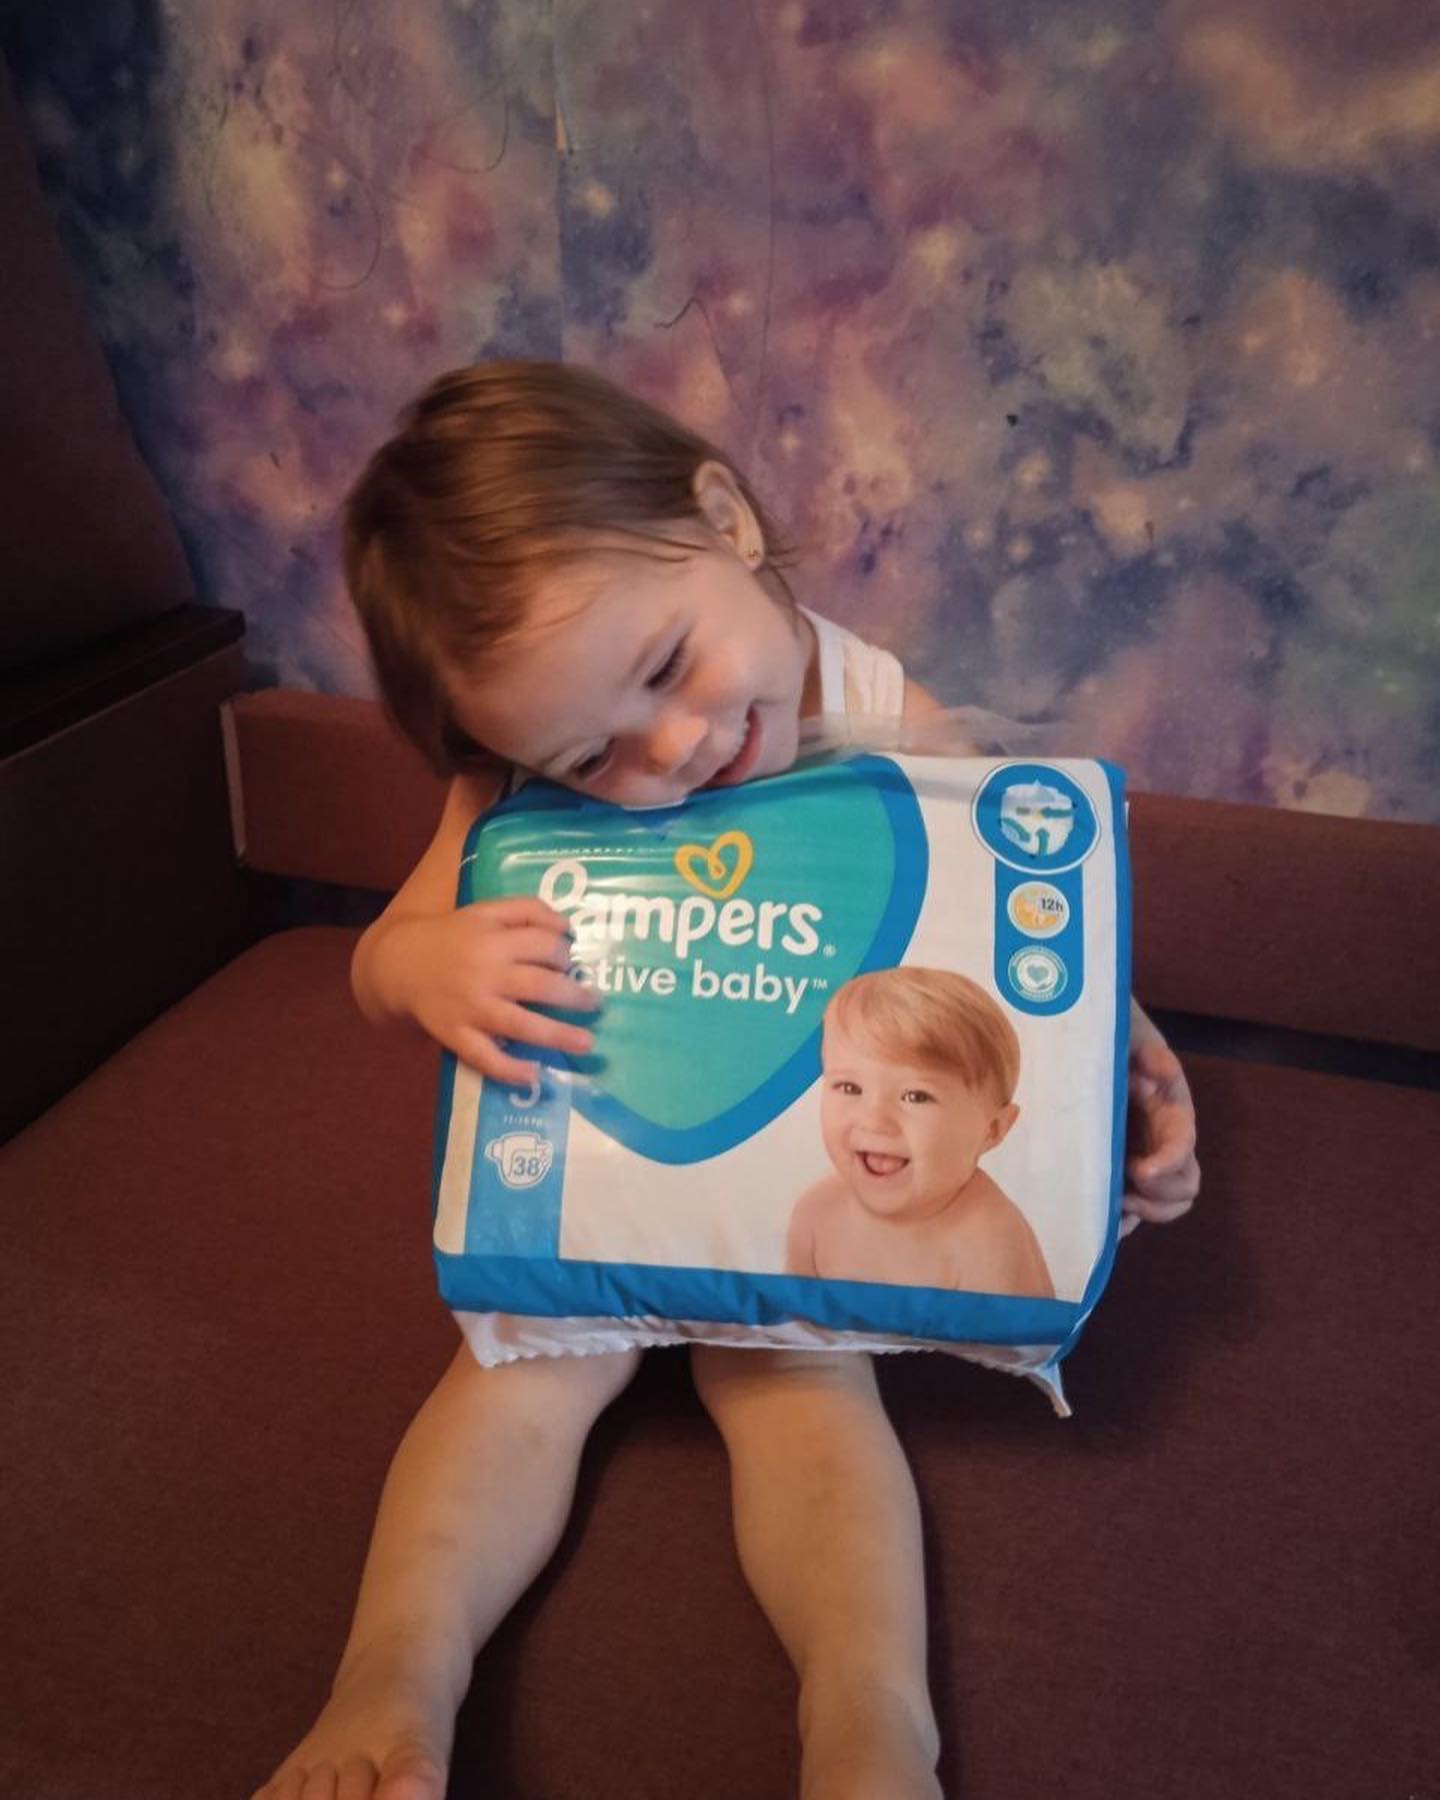 A little girl is holding a pack of pampers diapers.